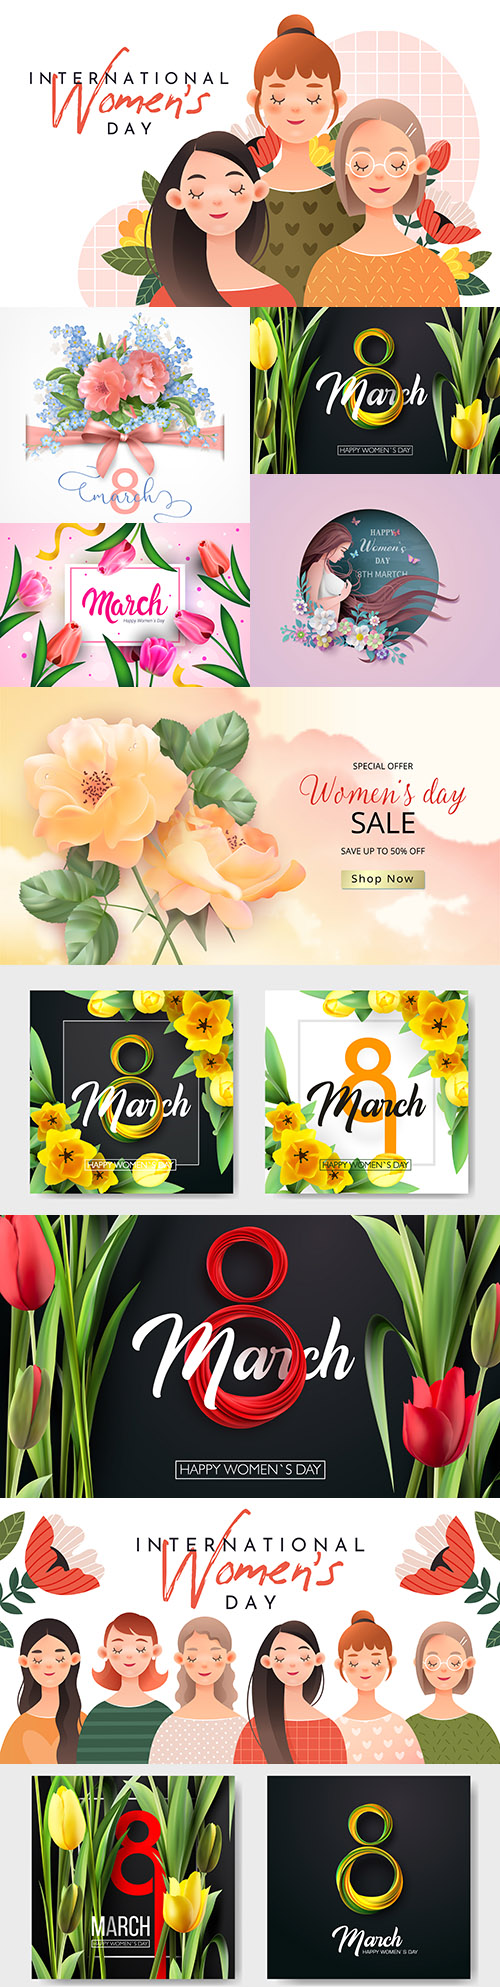 Happy Women's Day March 8 design illustrations 8